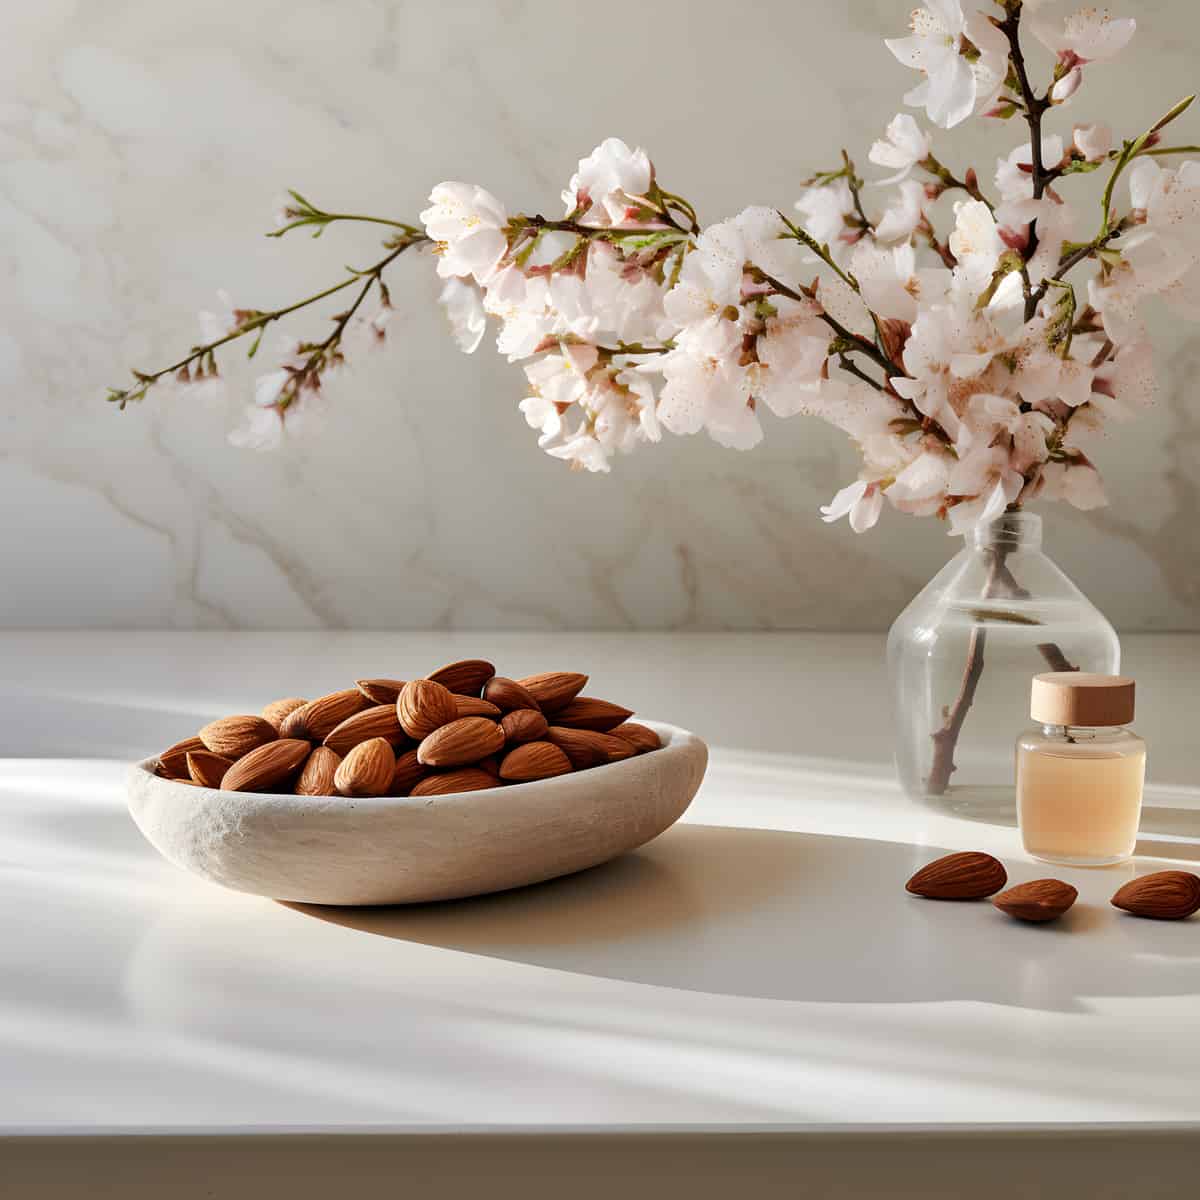 Almonds on a kitchen counter